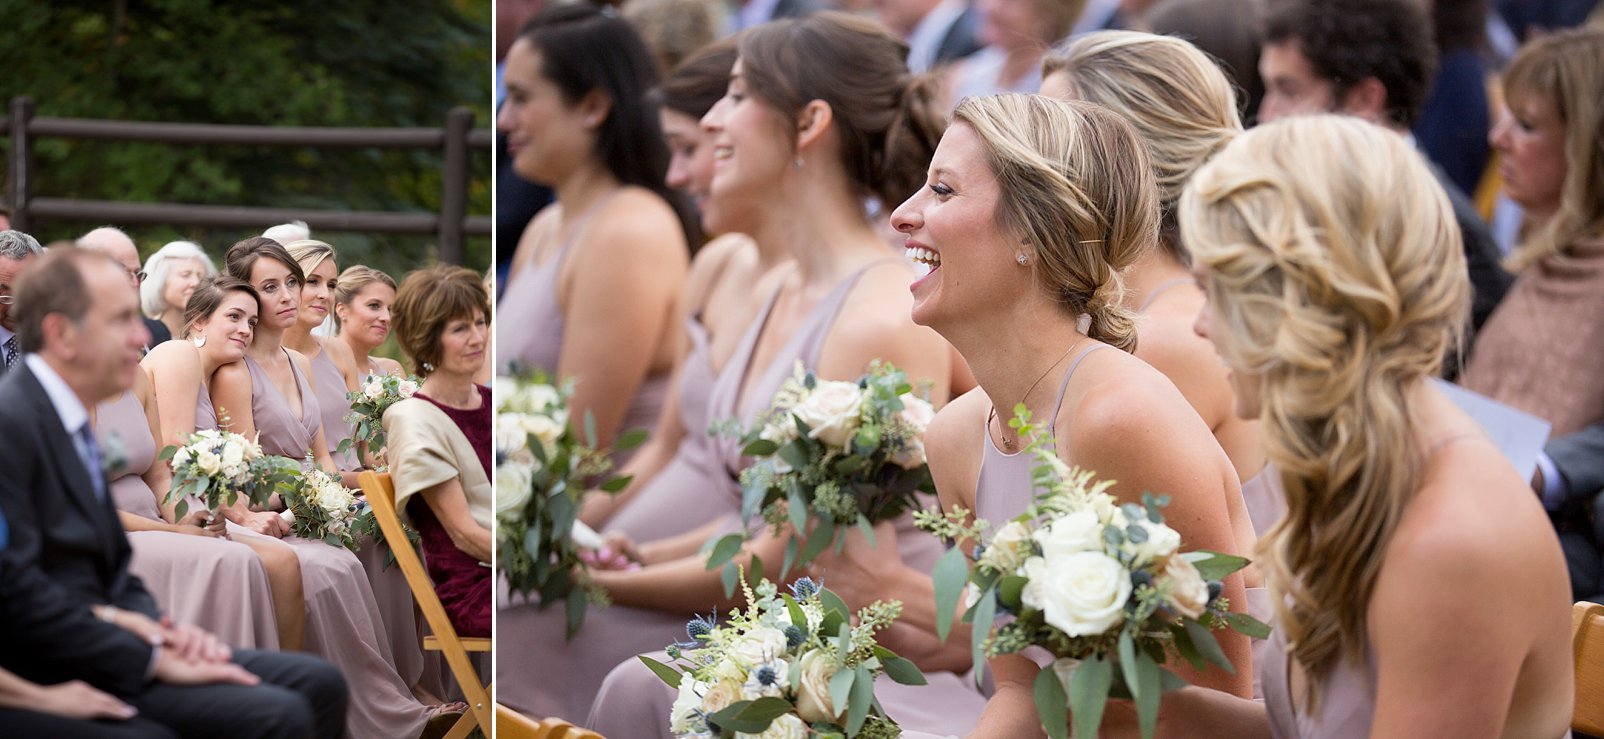 bridesmaids laughing at wedding ceremony